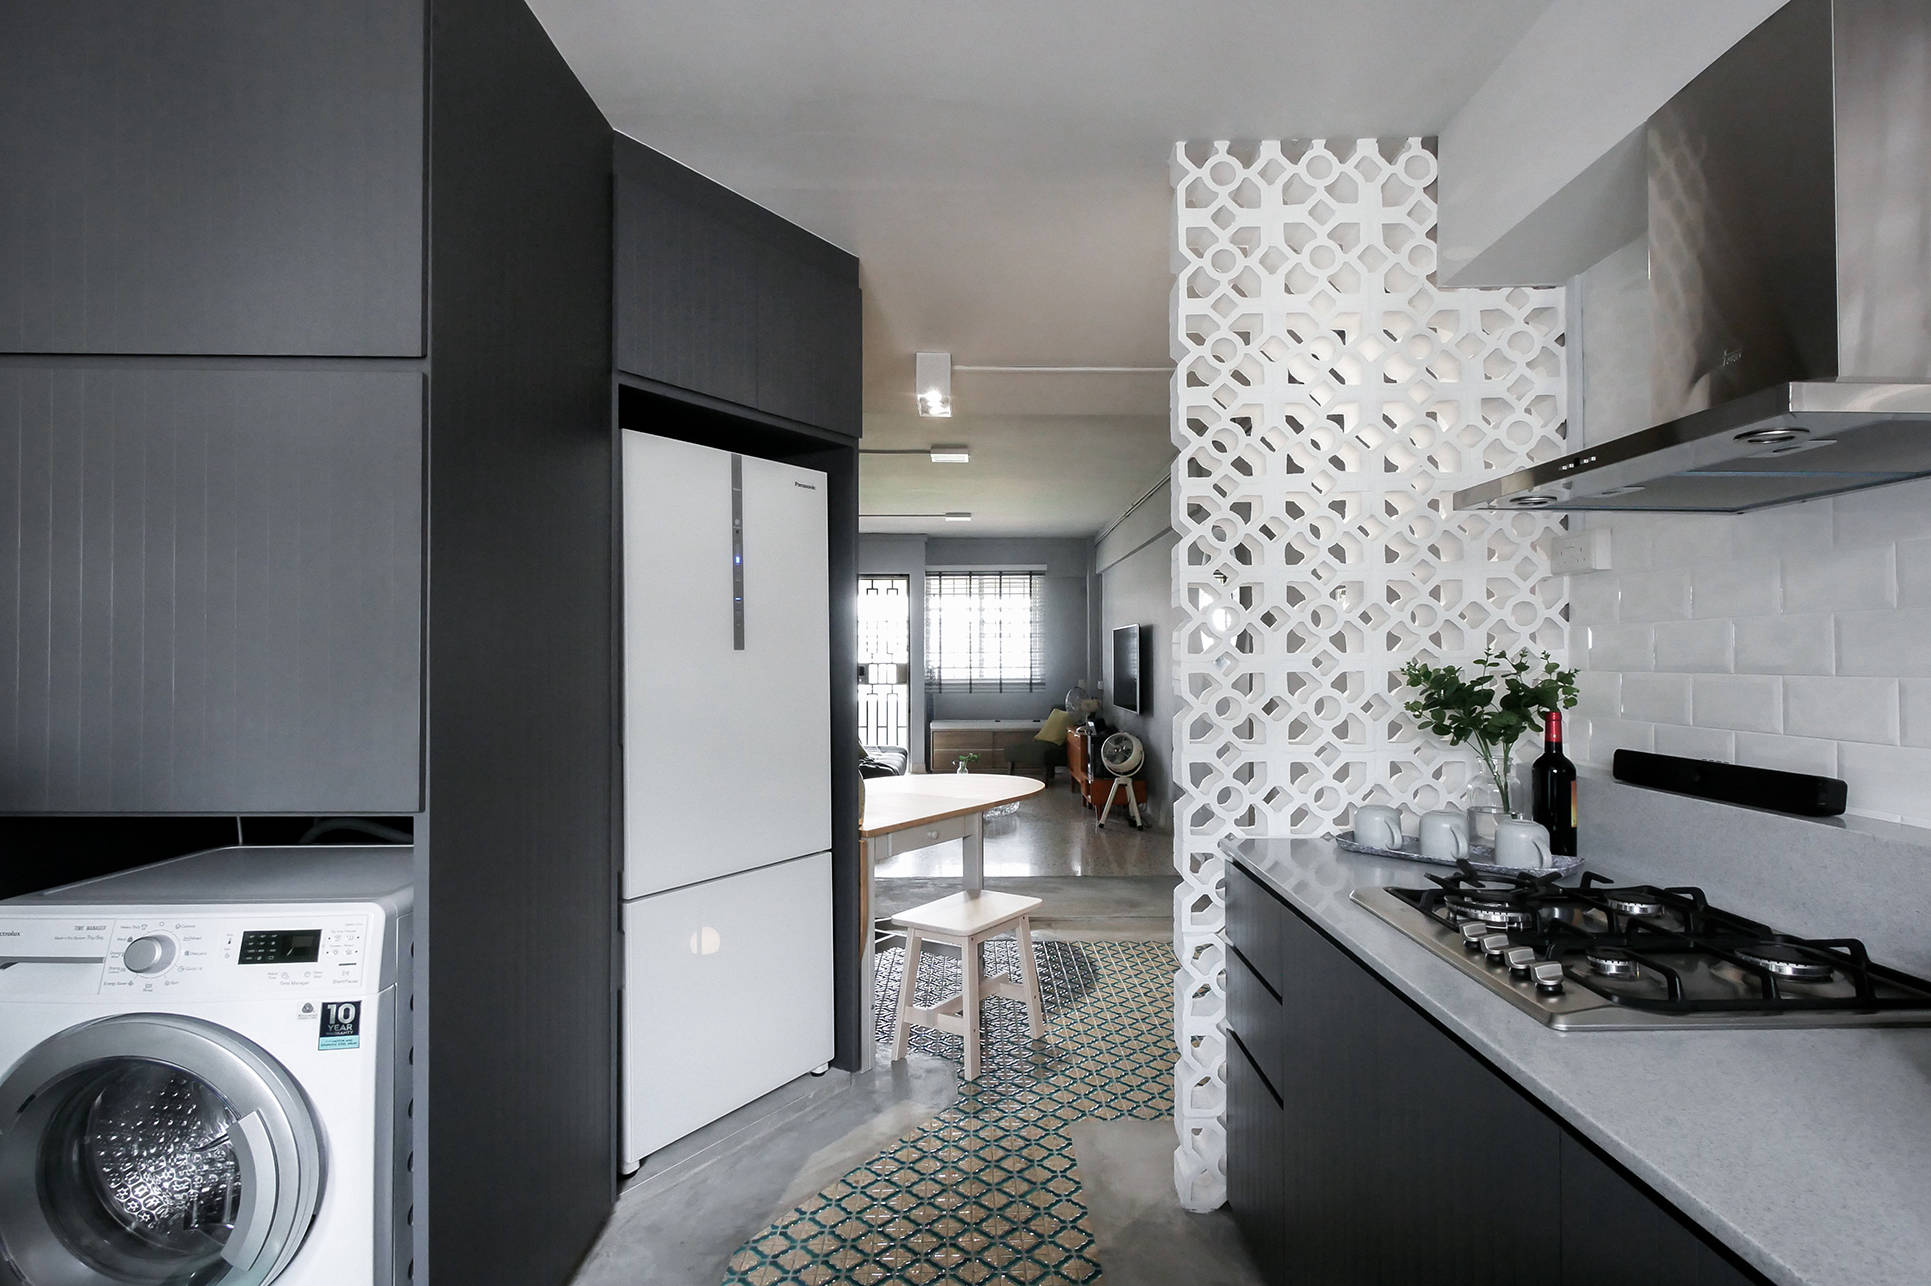 This 3 Room Hdb Flat Is Both Contemporary And Nostalgic